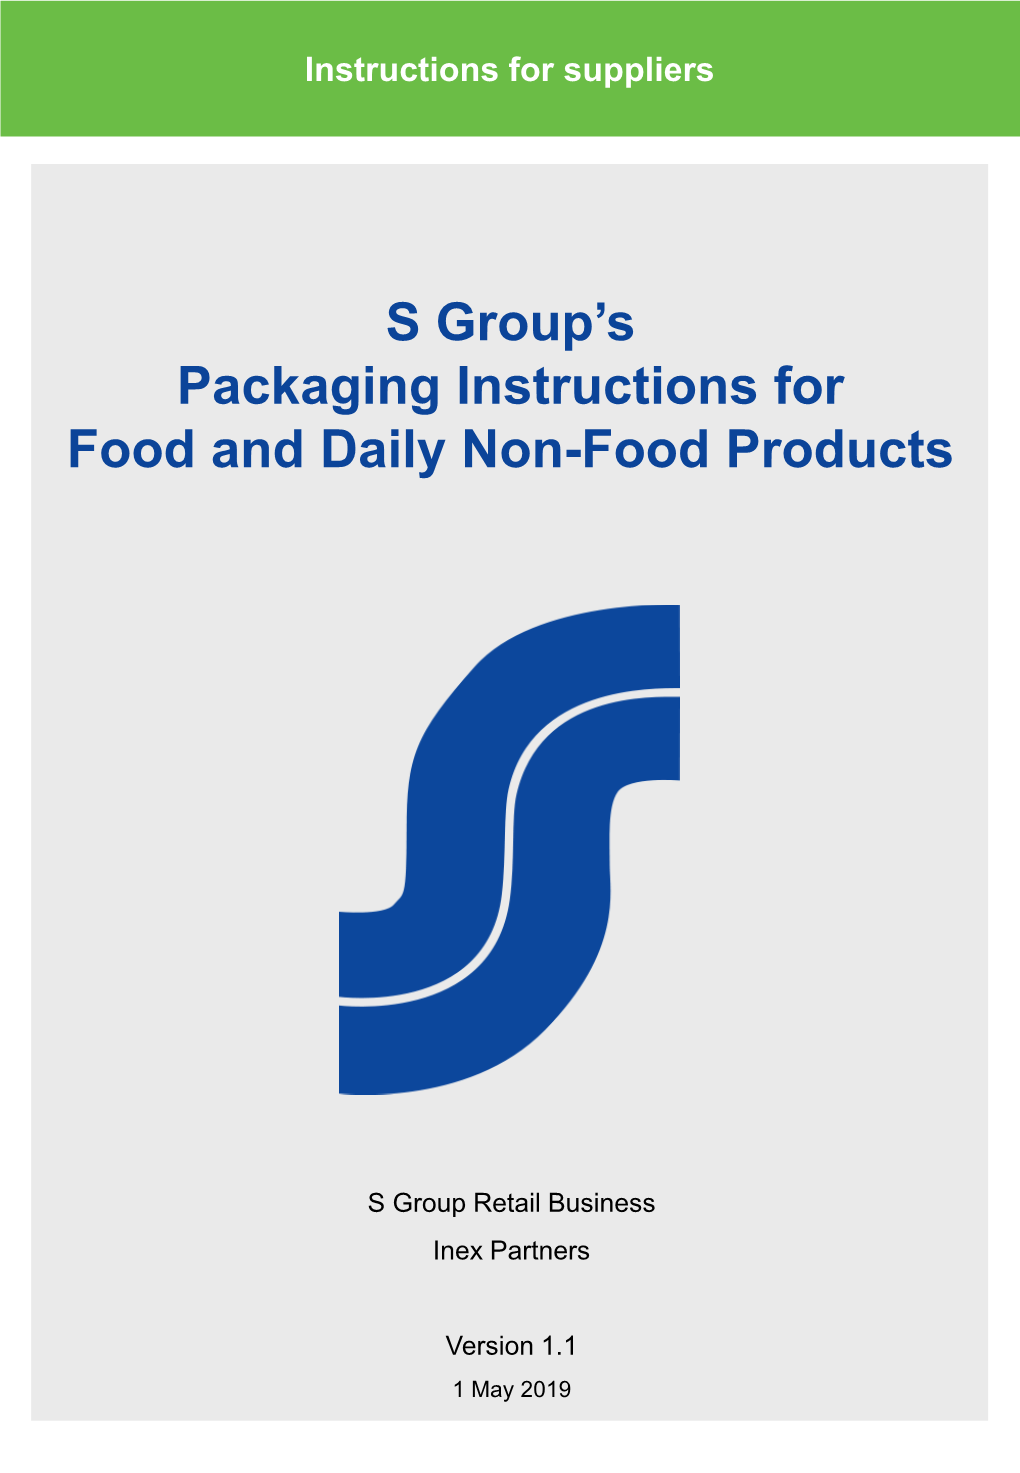 S Group's Packaging Instructions for Food and Daily Non-Food